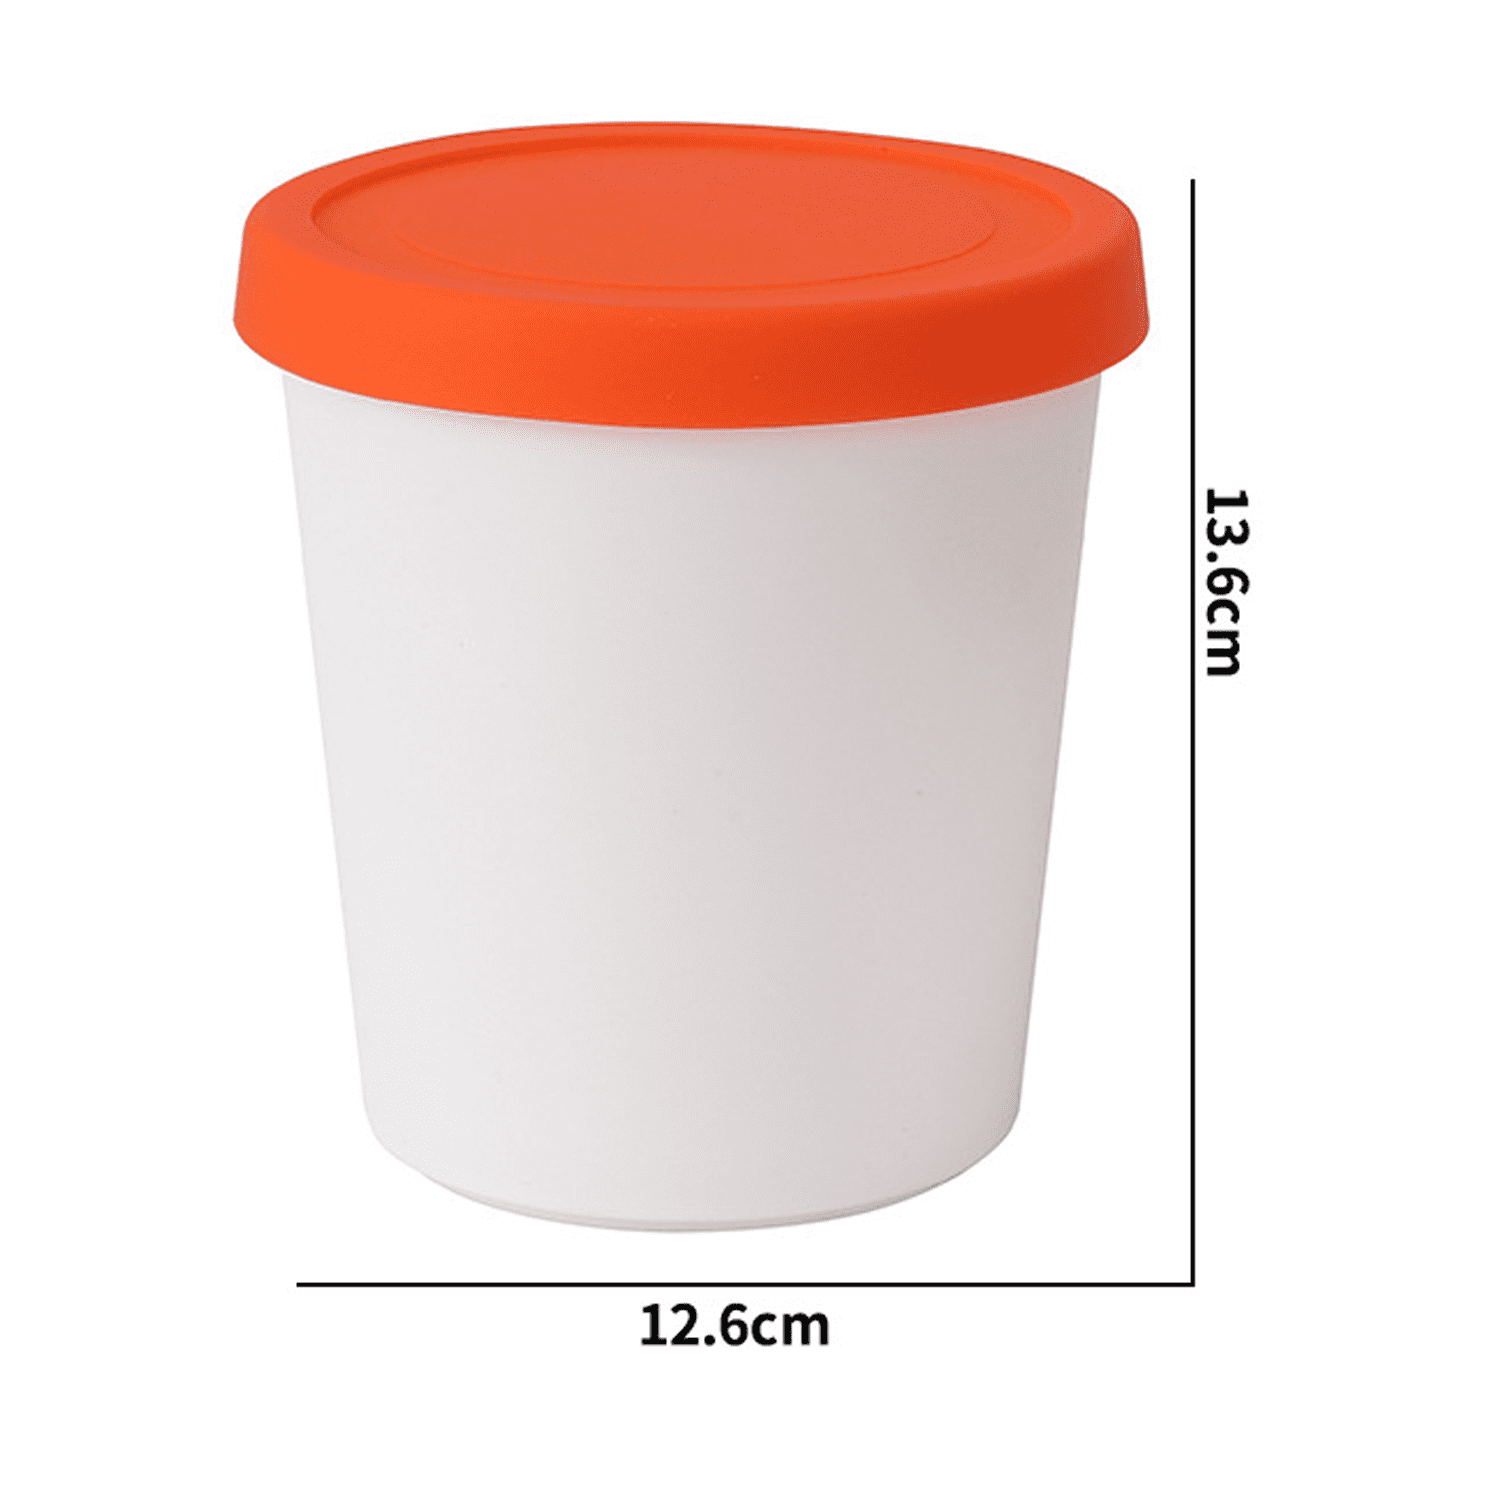 Hemoton Reusable Ice Cream Storage Containers with Lids Stainless Steel  Food Keeper Freezer Box Insulated Ice Cream Tub for Refrigerator Home Made  Ice